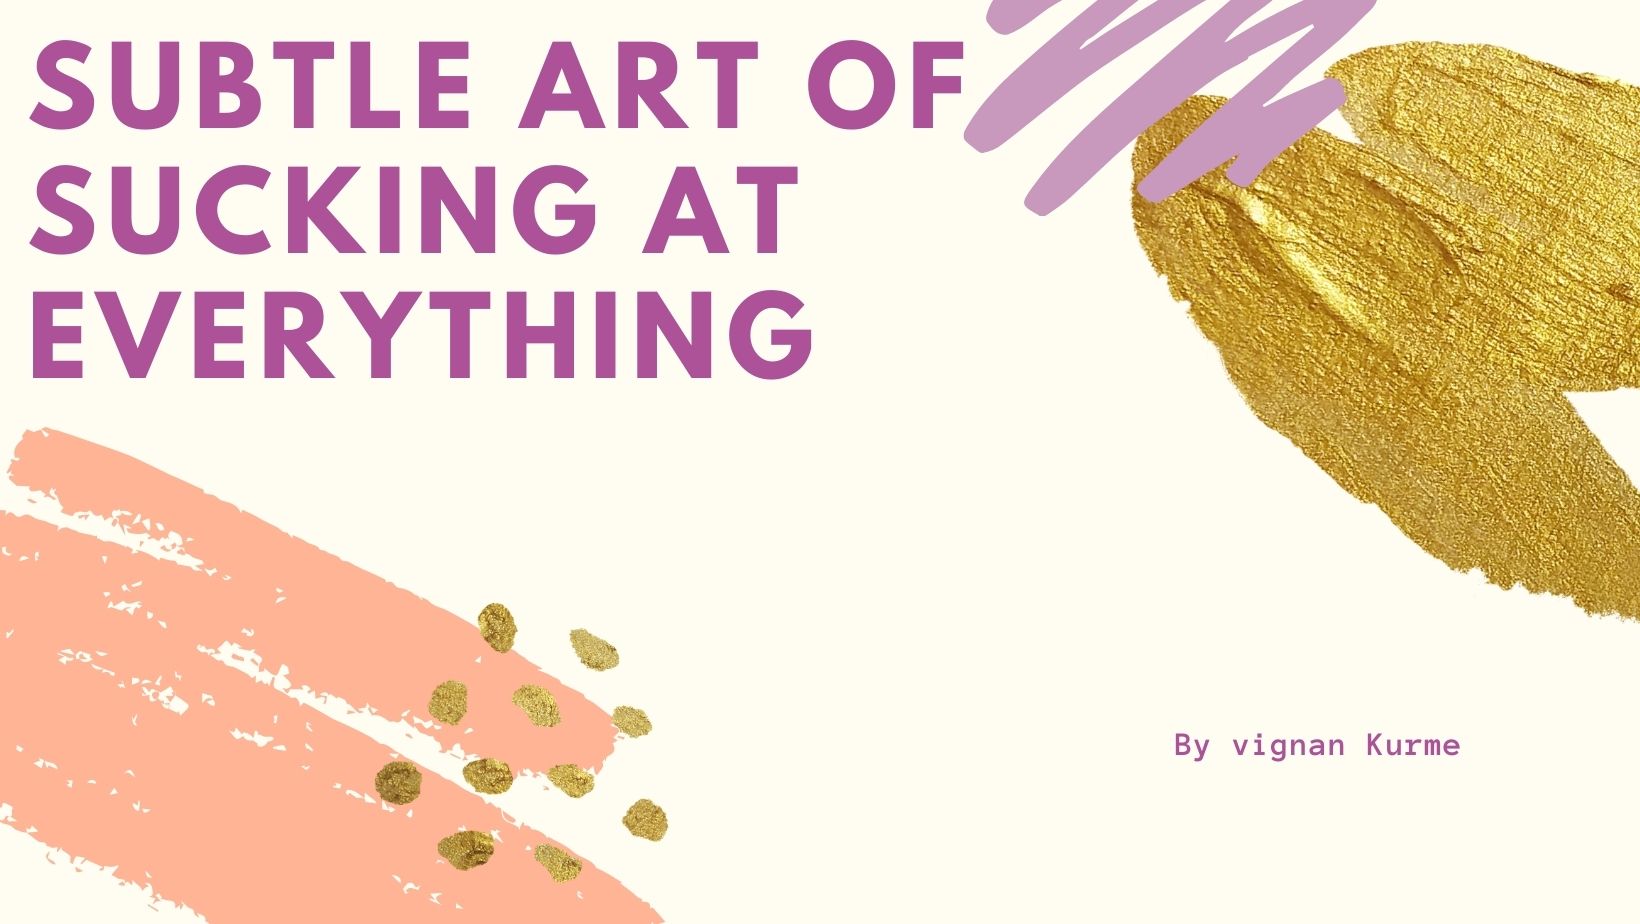 the subtle art of sucking at everything